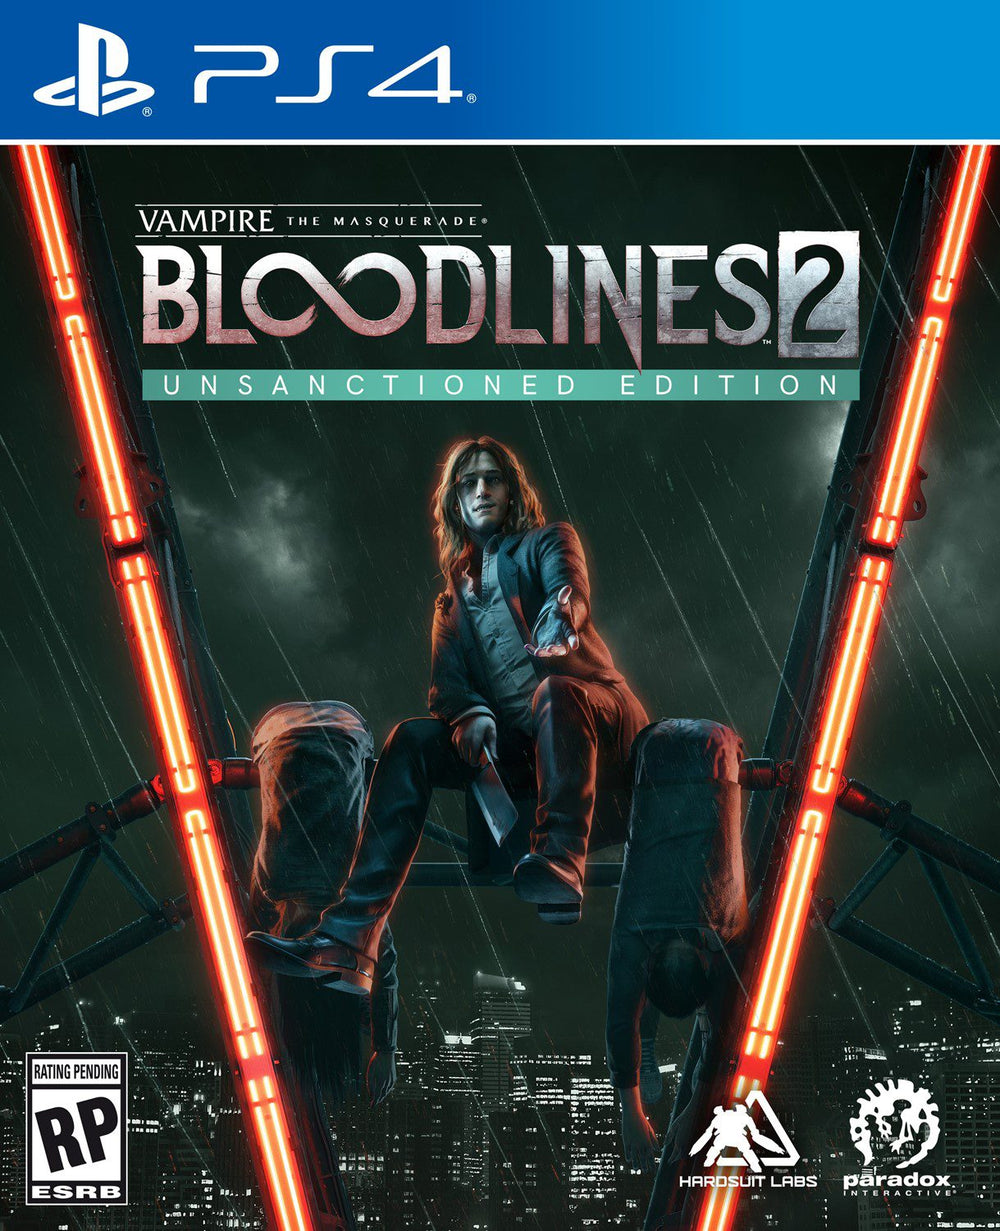 Vampire: The Masquerade - Bloodlines 2 (Unsanctioned Edition) [PS4]